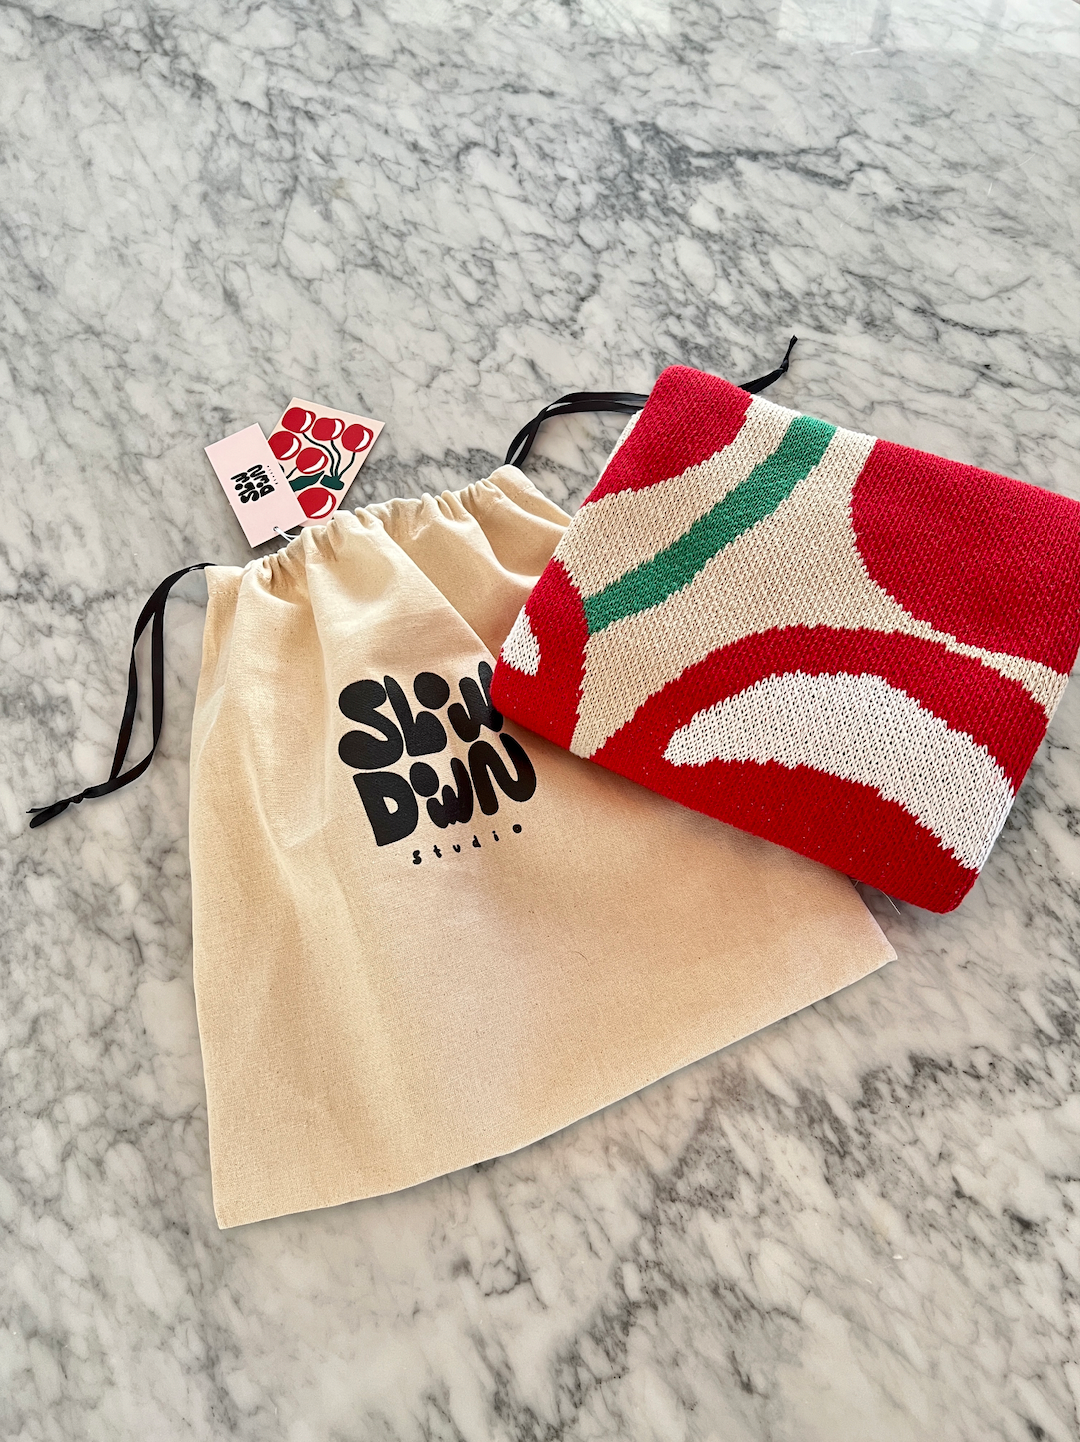 A folded mini blanket in a cherry pattern shown with its accompanying gift bag